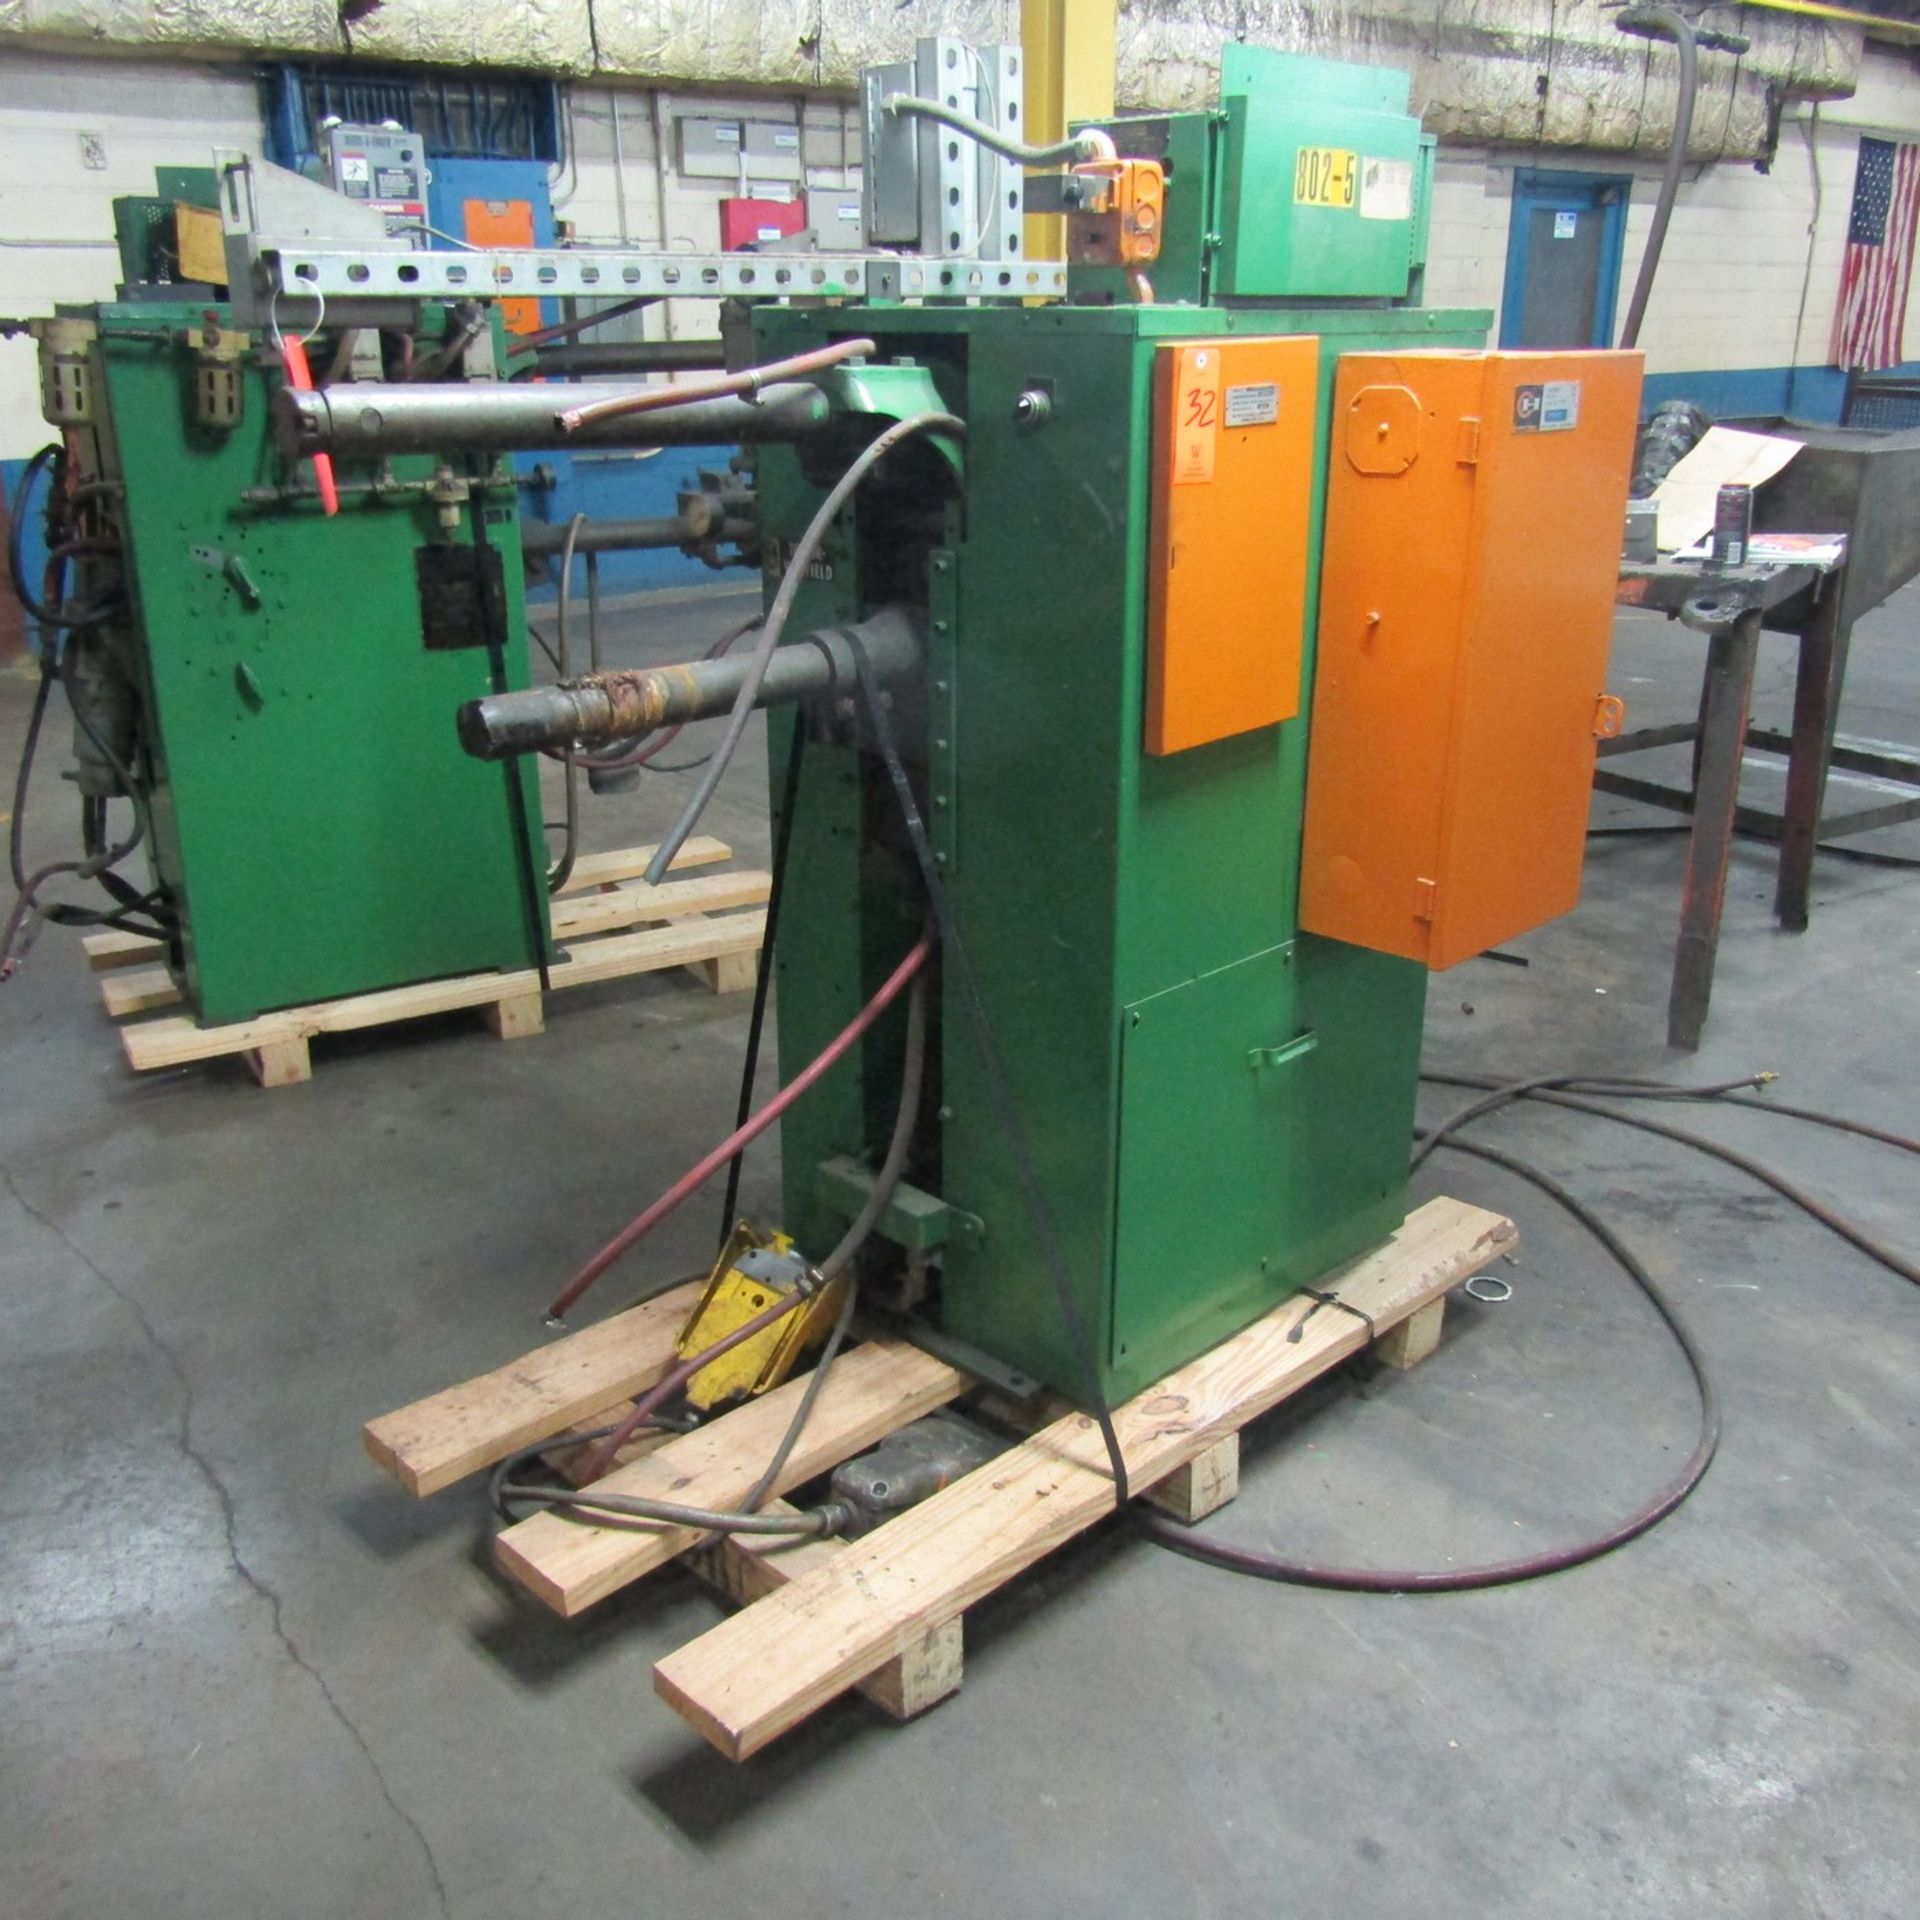 Taylor Winfield 30-KVA Model ND-24-30AIROPER Spot Welder, S/N: 73916-A; with 24 in. (approx.) - Image 2 of 4